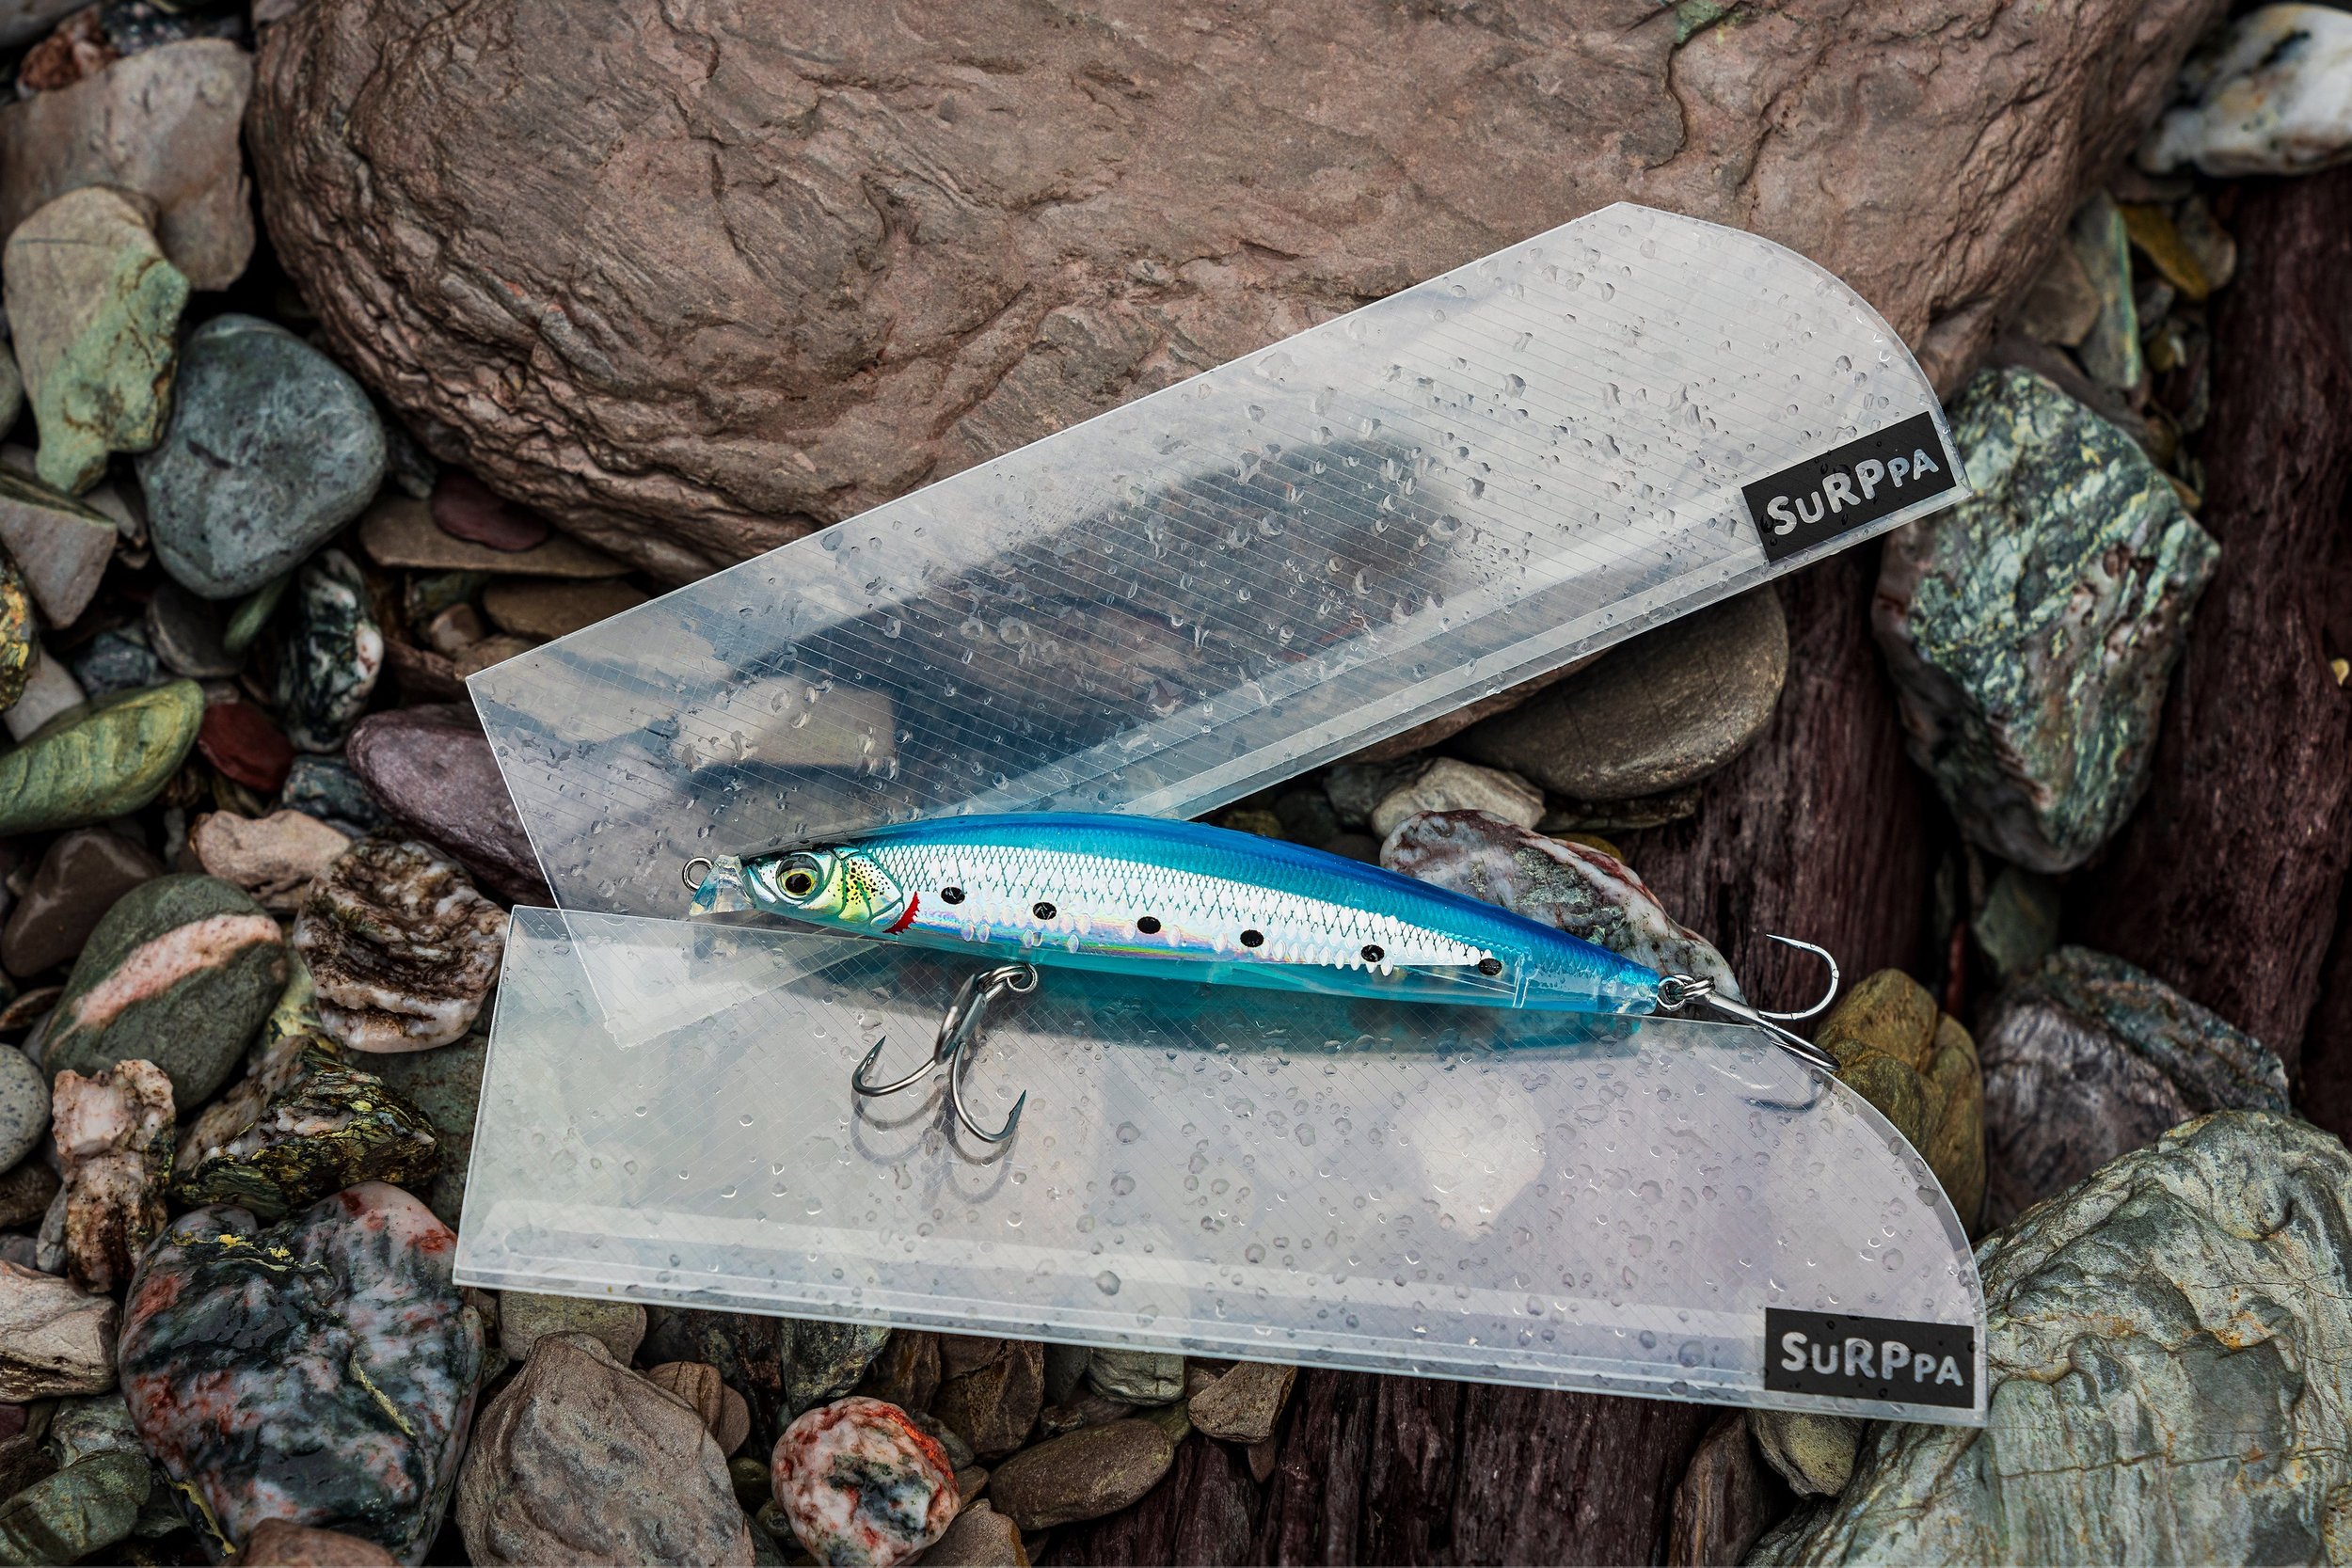 Surppa Lure Holders are slick. Awesome for big baits with trebles like  swimbaits and topwaters. #spro #tackle #bassfishing